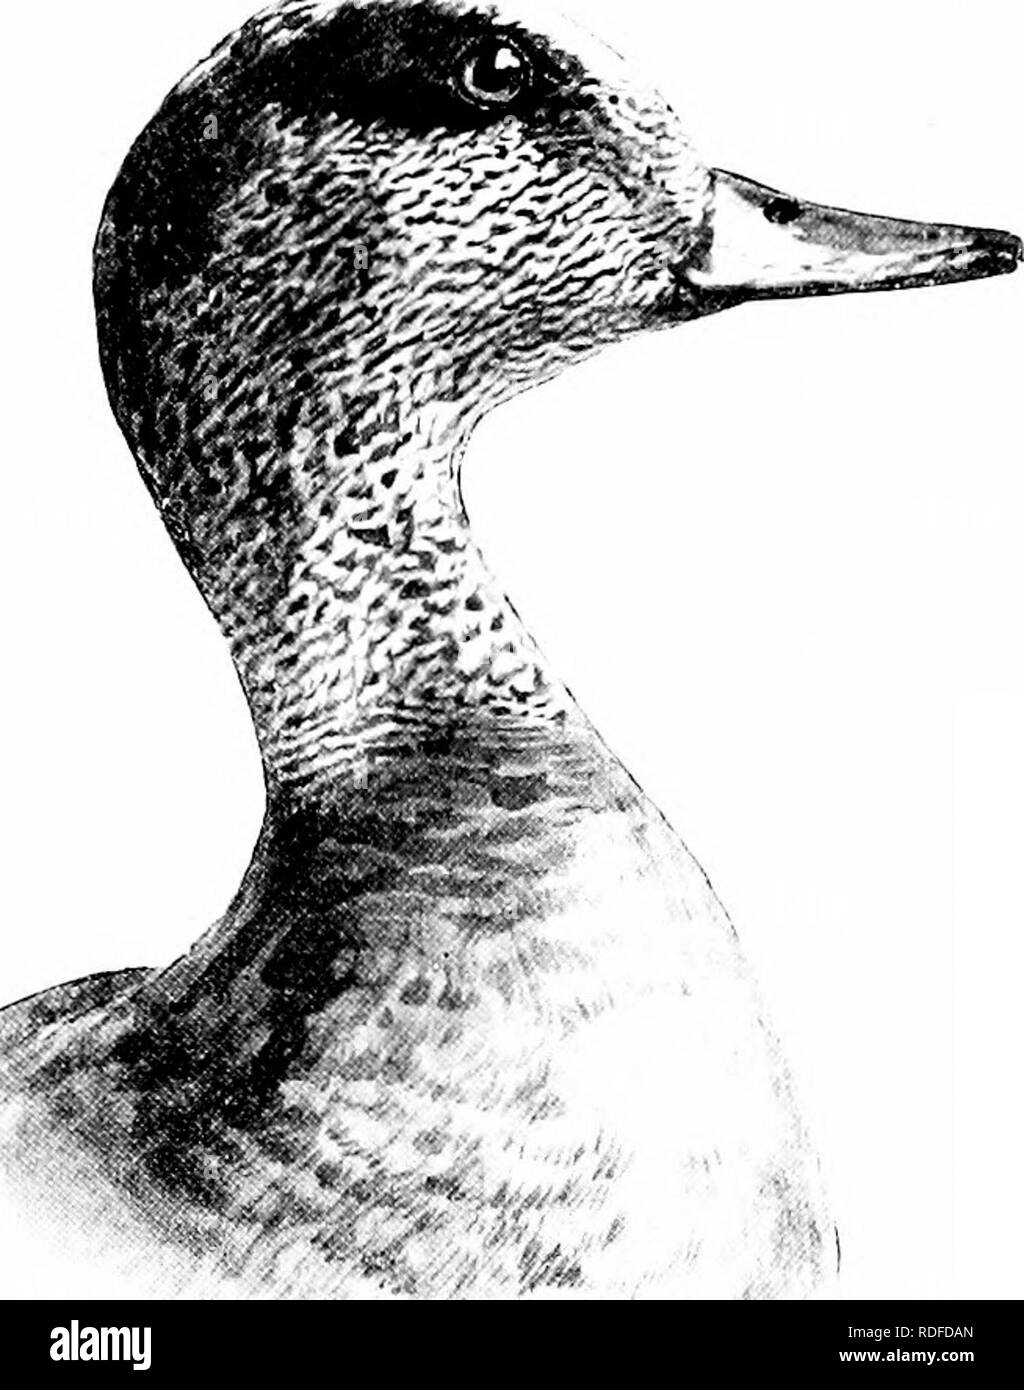 . How to know the ducks, geese and swans of North America, all the species being grouped according to size and color. Ducks; Geese; Swans; Birds. DUCK8, GEESE AND SWANS OF NORTH AMERICA. 45 tail coverts und ruinp, black; speculum, black and white; the lesser wing coverts, cliestuut; bill, black; feet, orange; axillars, white, with white shafts. Length, 19.50; wing, 10; bill, 1.60. Adult female : Somewhat resembles the male, but has tlie under wing coverts pure white, and usually little or no chestnut on the lesser wing coverts. Length, 19 ; wing, 10.1.5 ; bill, 1.55. Ranges throughout North Am Stock Photo